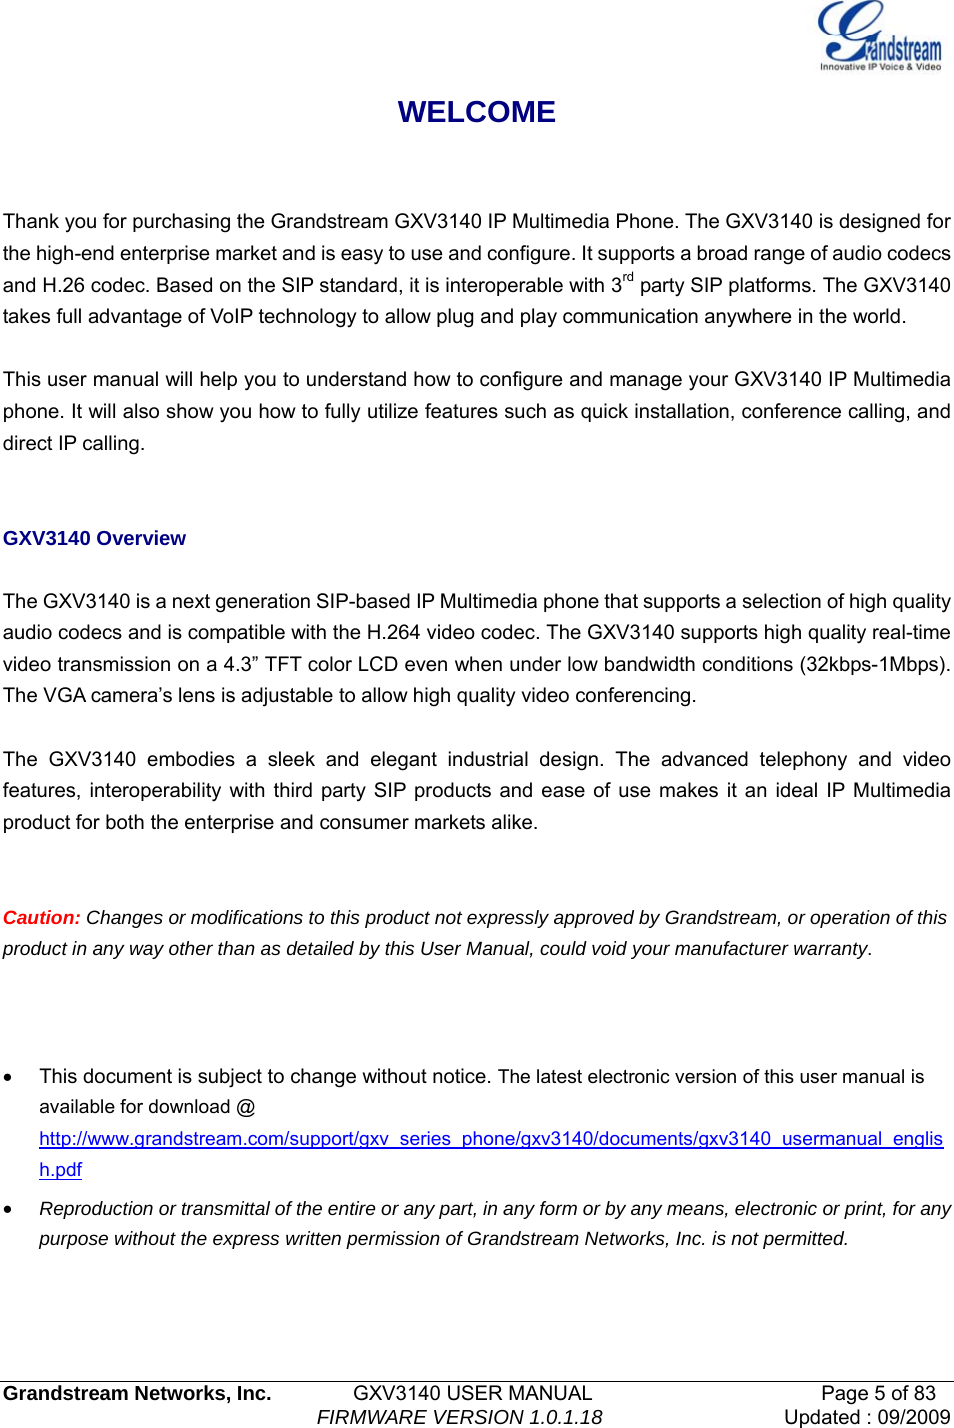   Grandstream Networks, Inc.        GXV3140 USER MANUAL                       Page 5 of 83                                FIRMWARE VERSION 1.0.1.18 Updated : 09/2009  WELCOME  Thank you for purchasing the Grandstream GXV3140 IP Multimedia Phone. The GXV3140 is designed for the high-end enterprise market and is easy to use and configure. It supports a broad range of audio codecs and H.26 codec. Based on the SIP standard, it is interoperable with 3rd party SIP platforms. The GXV3140 takes full advantage of VoIP technology to allow plug and play communication anywhere in the world.  This user manual will help you to understand how to configure and manage your GXV3140 IP Multimedia phone. It will also show you how to fully utilize features such as quick installation, conference calling, and direct IP calling.   GXV3140 Overview  The GXV3140 is a next generation SIP-based IP Multimedia phone that supports a selection of high quality audio codecs and is compatible with the H.264 video codec. The GXV3140 supports high quality real-time video transmission on a 4.3” TFT color LCD even when under low bandwidth conditions (32kbps-1Mbps). The VGA camera’s lens is adjustable to allow high quality video conferencing.  The GXV3140 embodies a sleek and elegant industrial design. The advanced telephony and video features, interoperability with third party SIP products and ease of use makes it an ideal IP Multimedia product for both the enterprise and consumer markets alike.   Caution: Changes or modifications to this product not expressly approved by Grandstream, or operation of this product in any way other than as detailed by this User Manual, could void your manufacturer warranty.    •  This document is subject to change without notice. The latest electronic version of this user manual is available for download @ http://www.grandstream.com/support/gxv_series_phone/gxv3140/documents/gxv3140_usermanual_english.pdf • Reproduction or transmittal of the entire or any part, in any form or by any means, electronic or print, for any purpose without the express written permission of Grandstream Networks, Inc. is not permitted.   